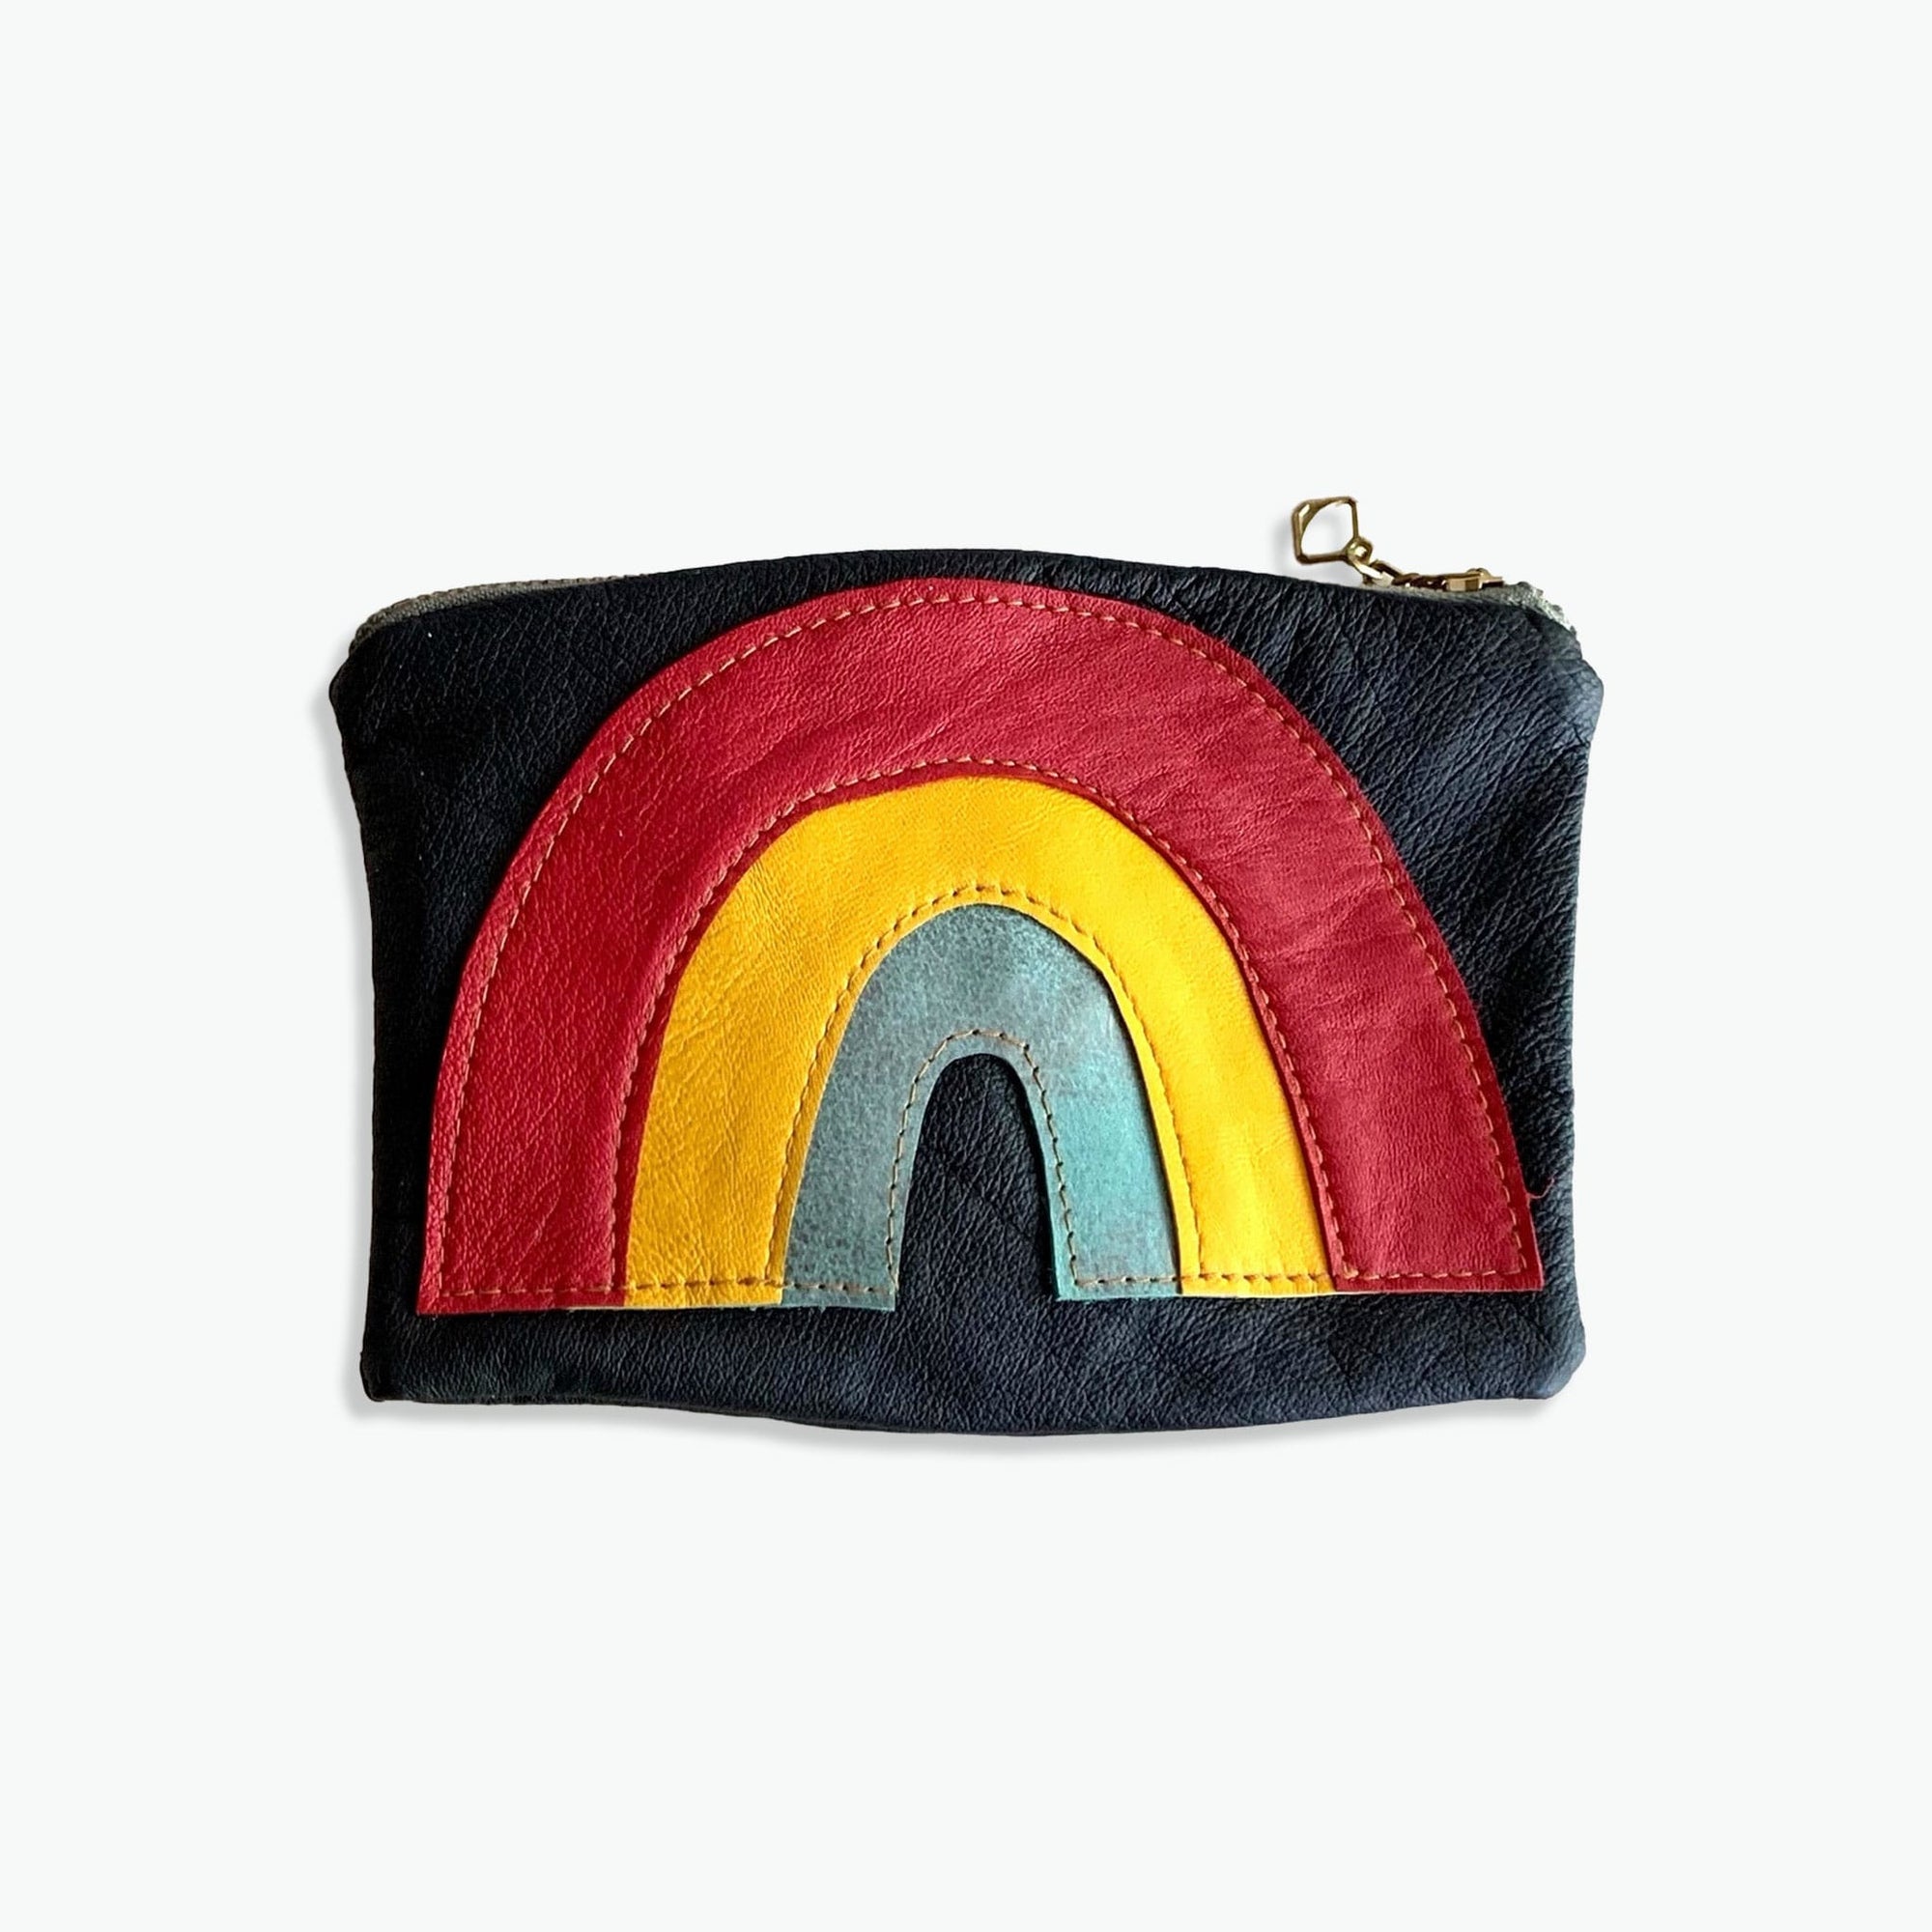 Recycled Leather Rainbow Pouch - red yellow blue